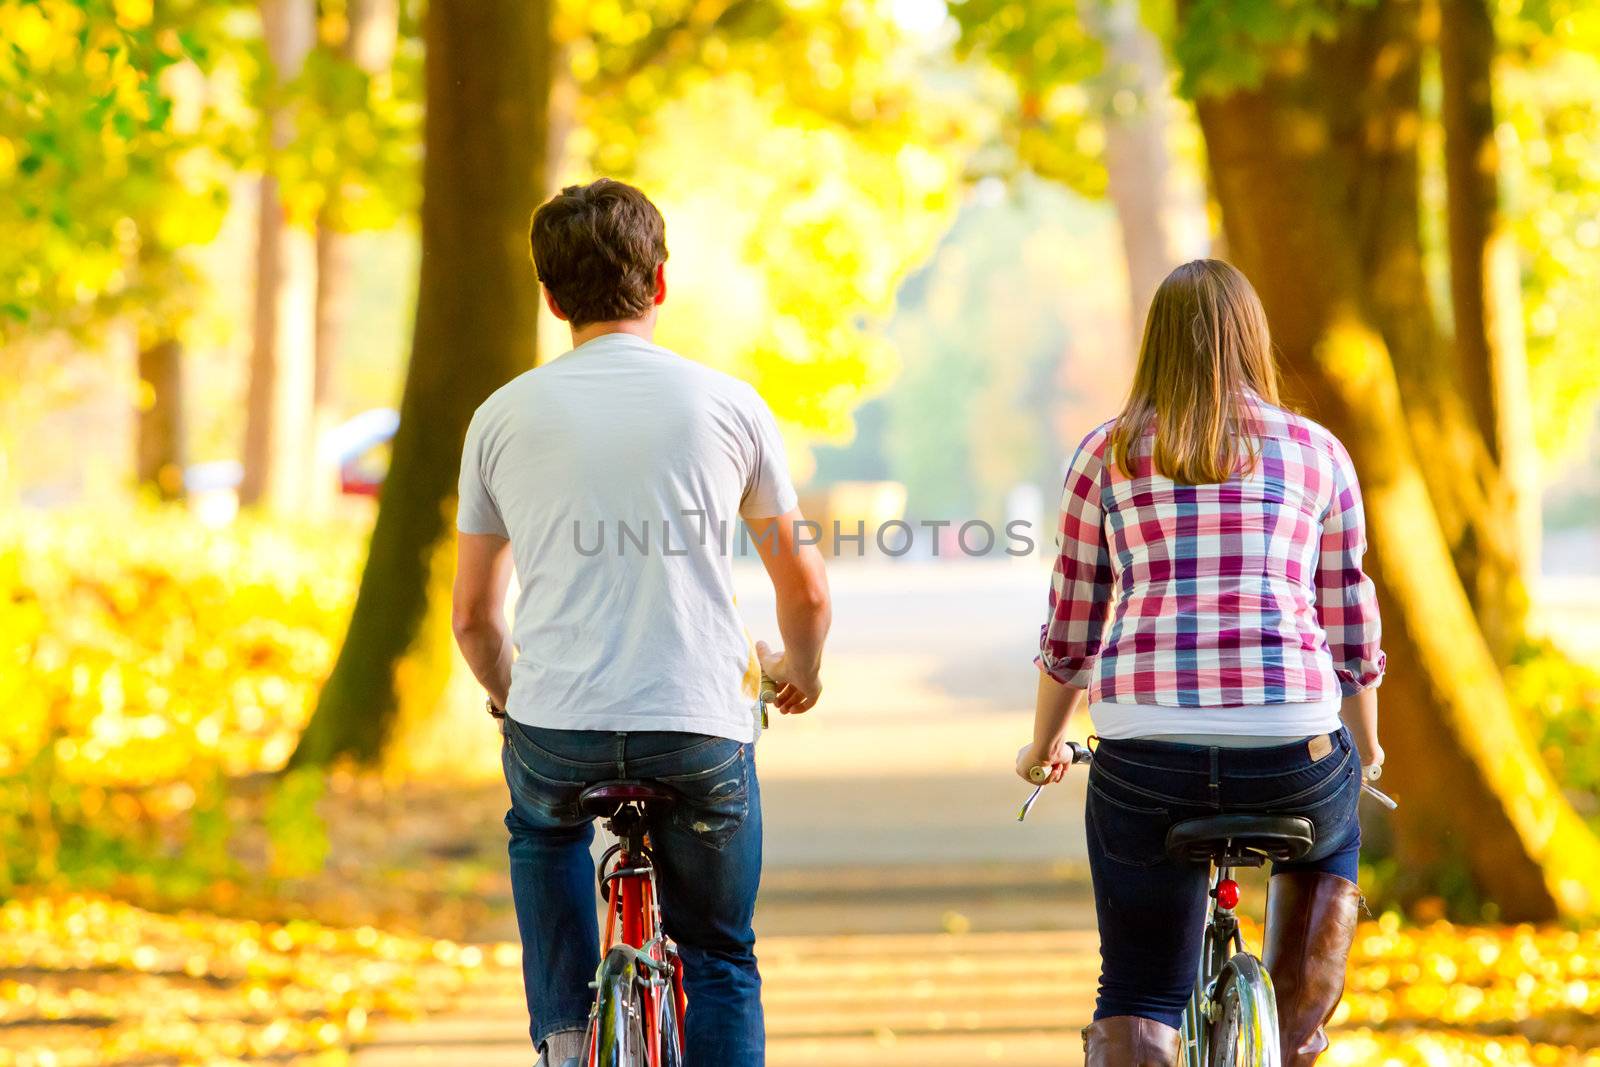 A couple rides their bikes together along a bicycle path in the fall.